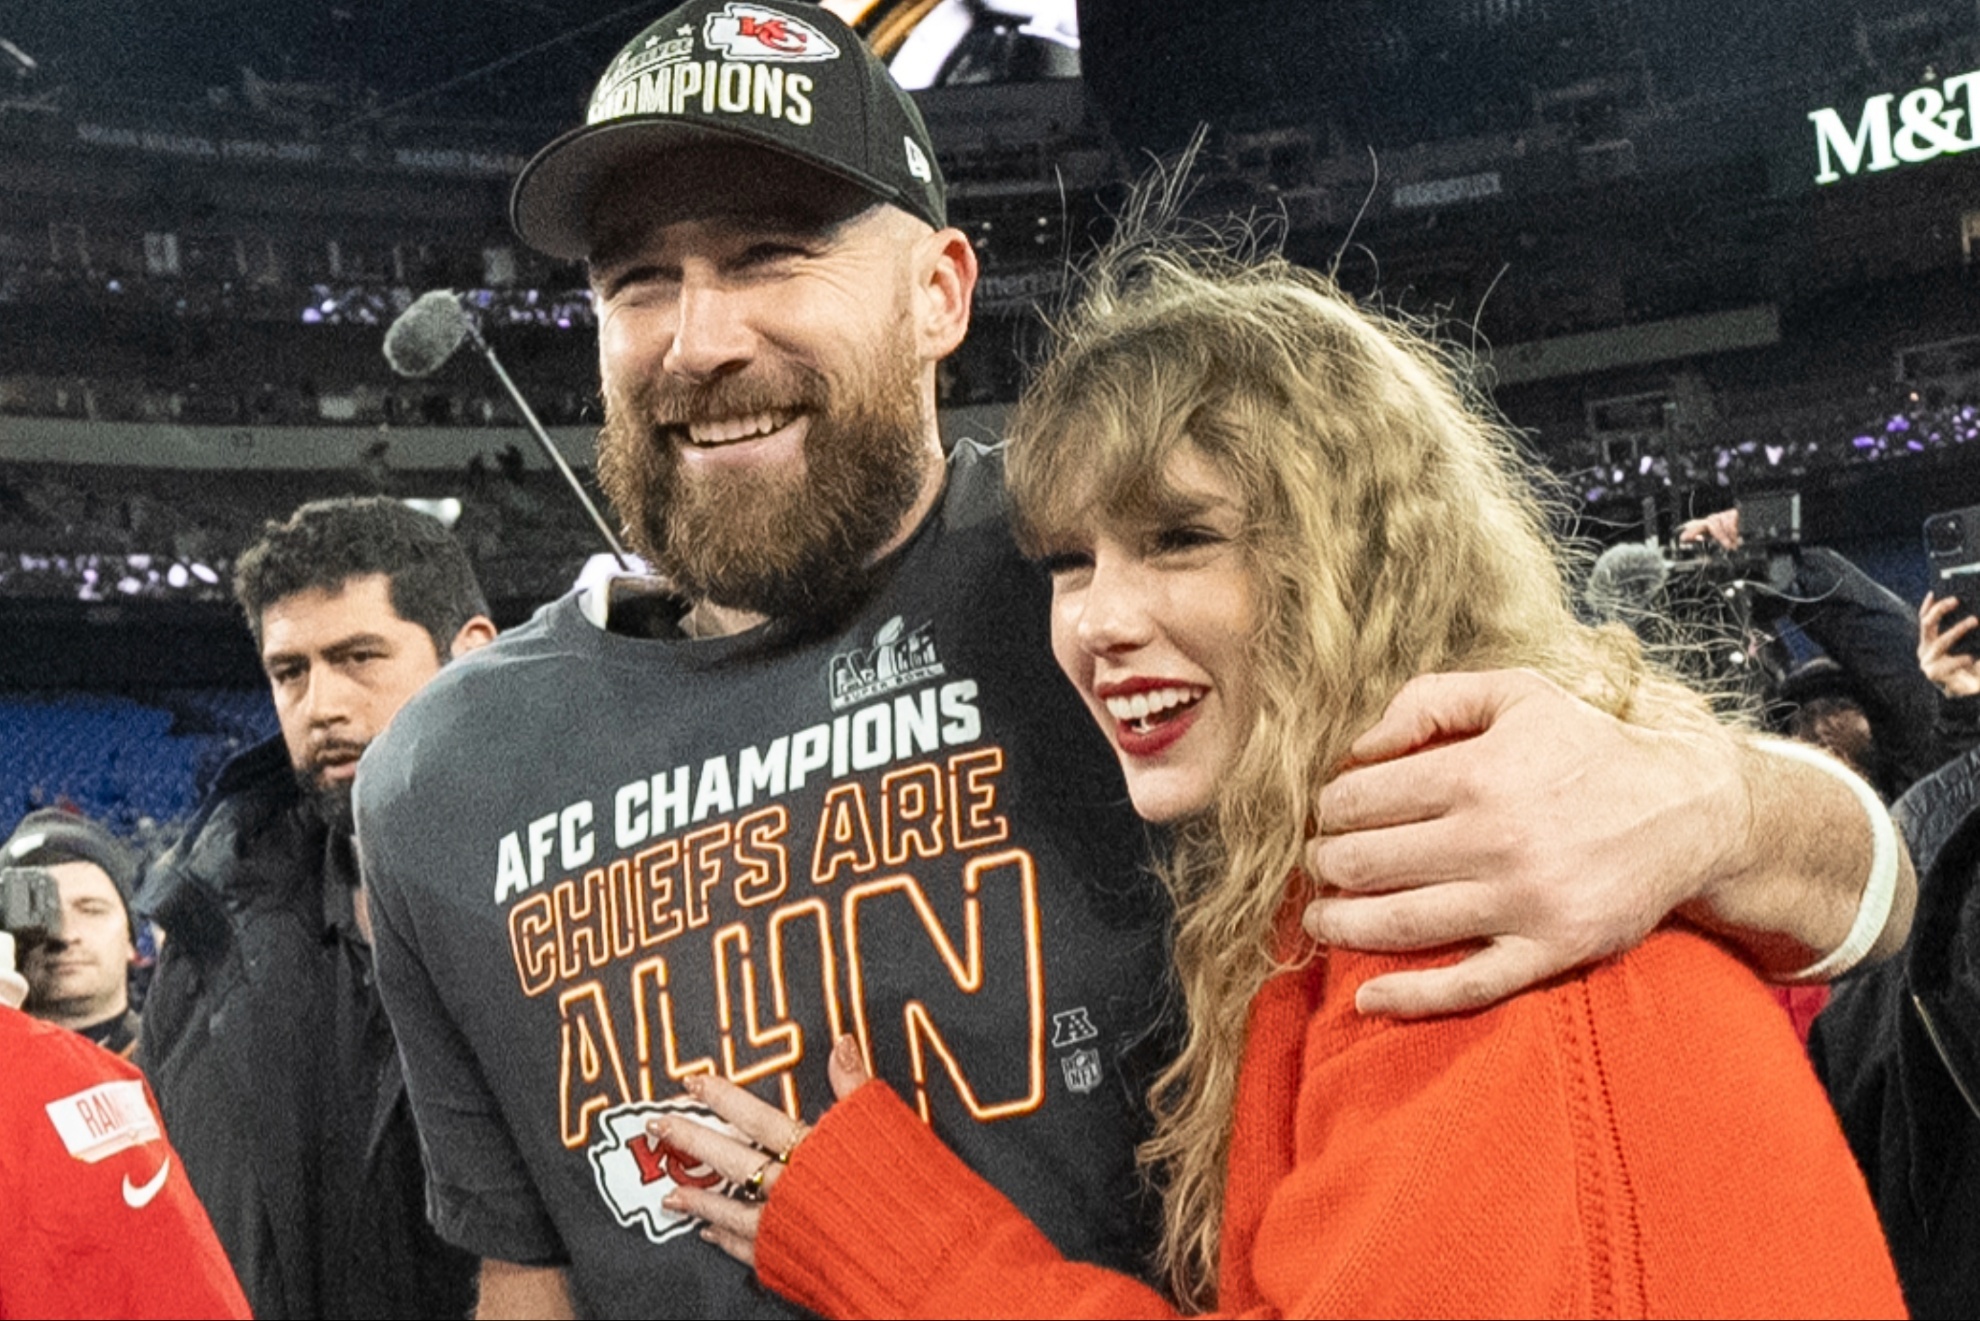 Chiefs star tight end Travis Kelce and pop superstar Taylor Swift.